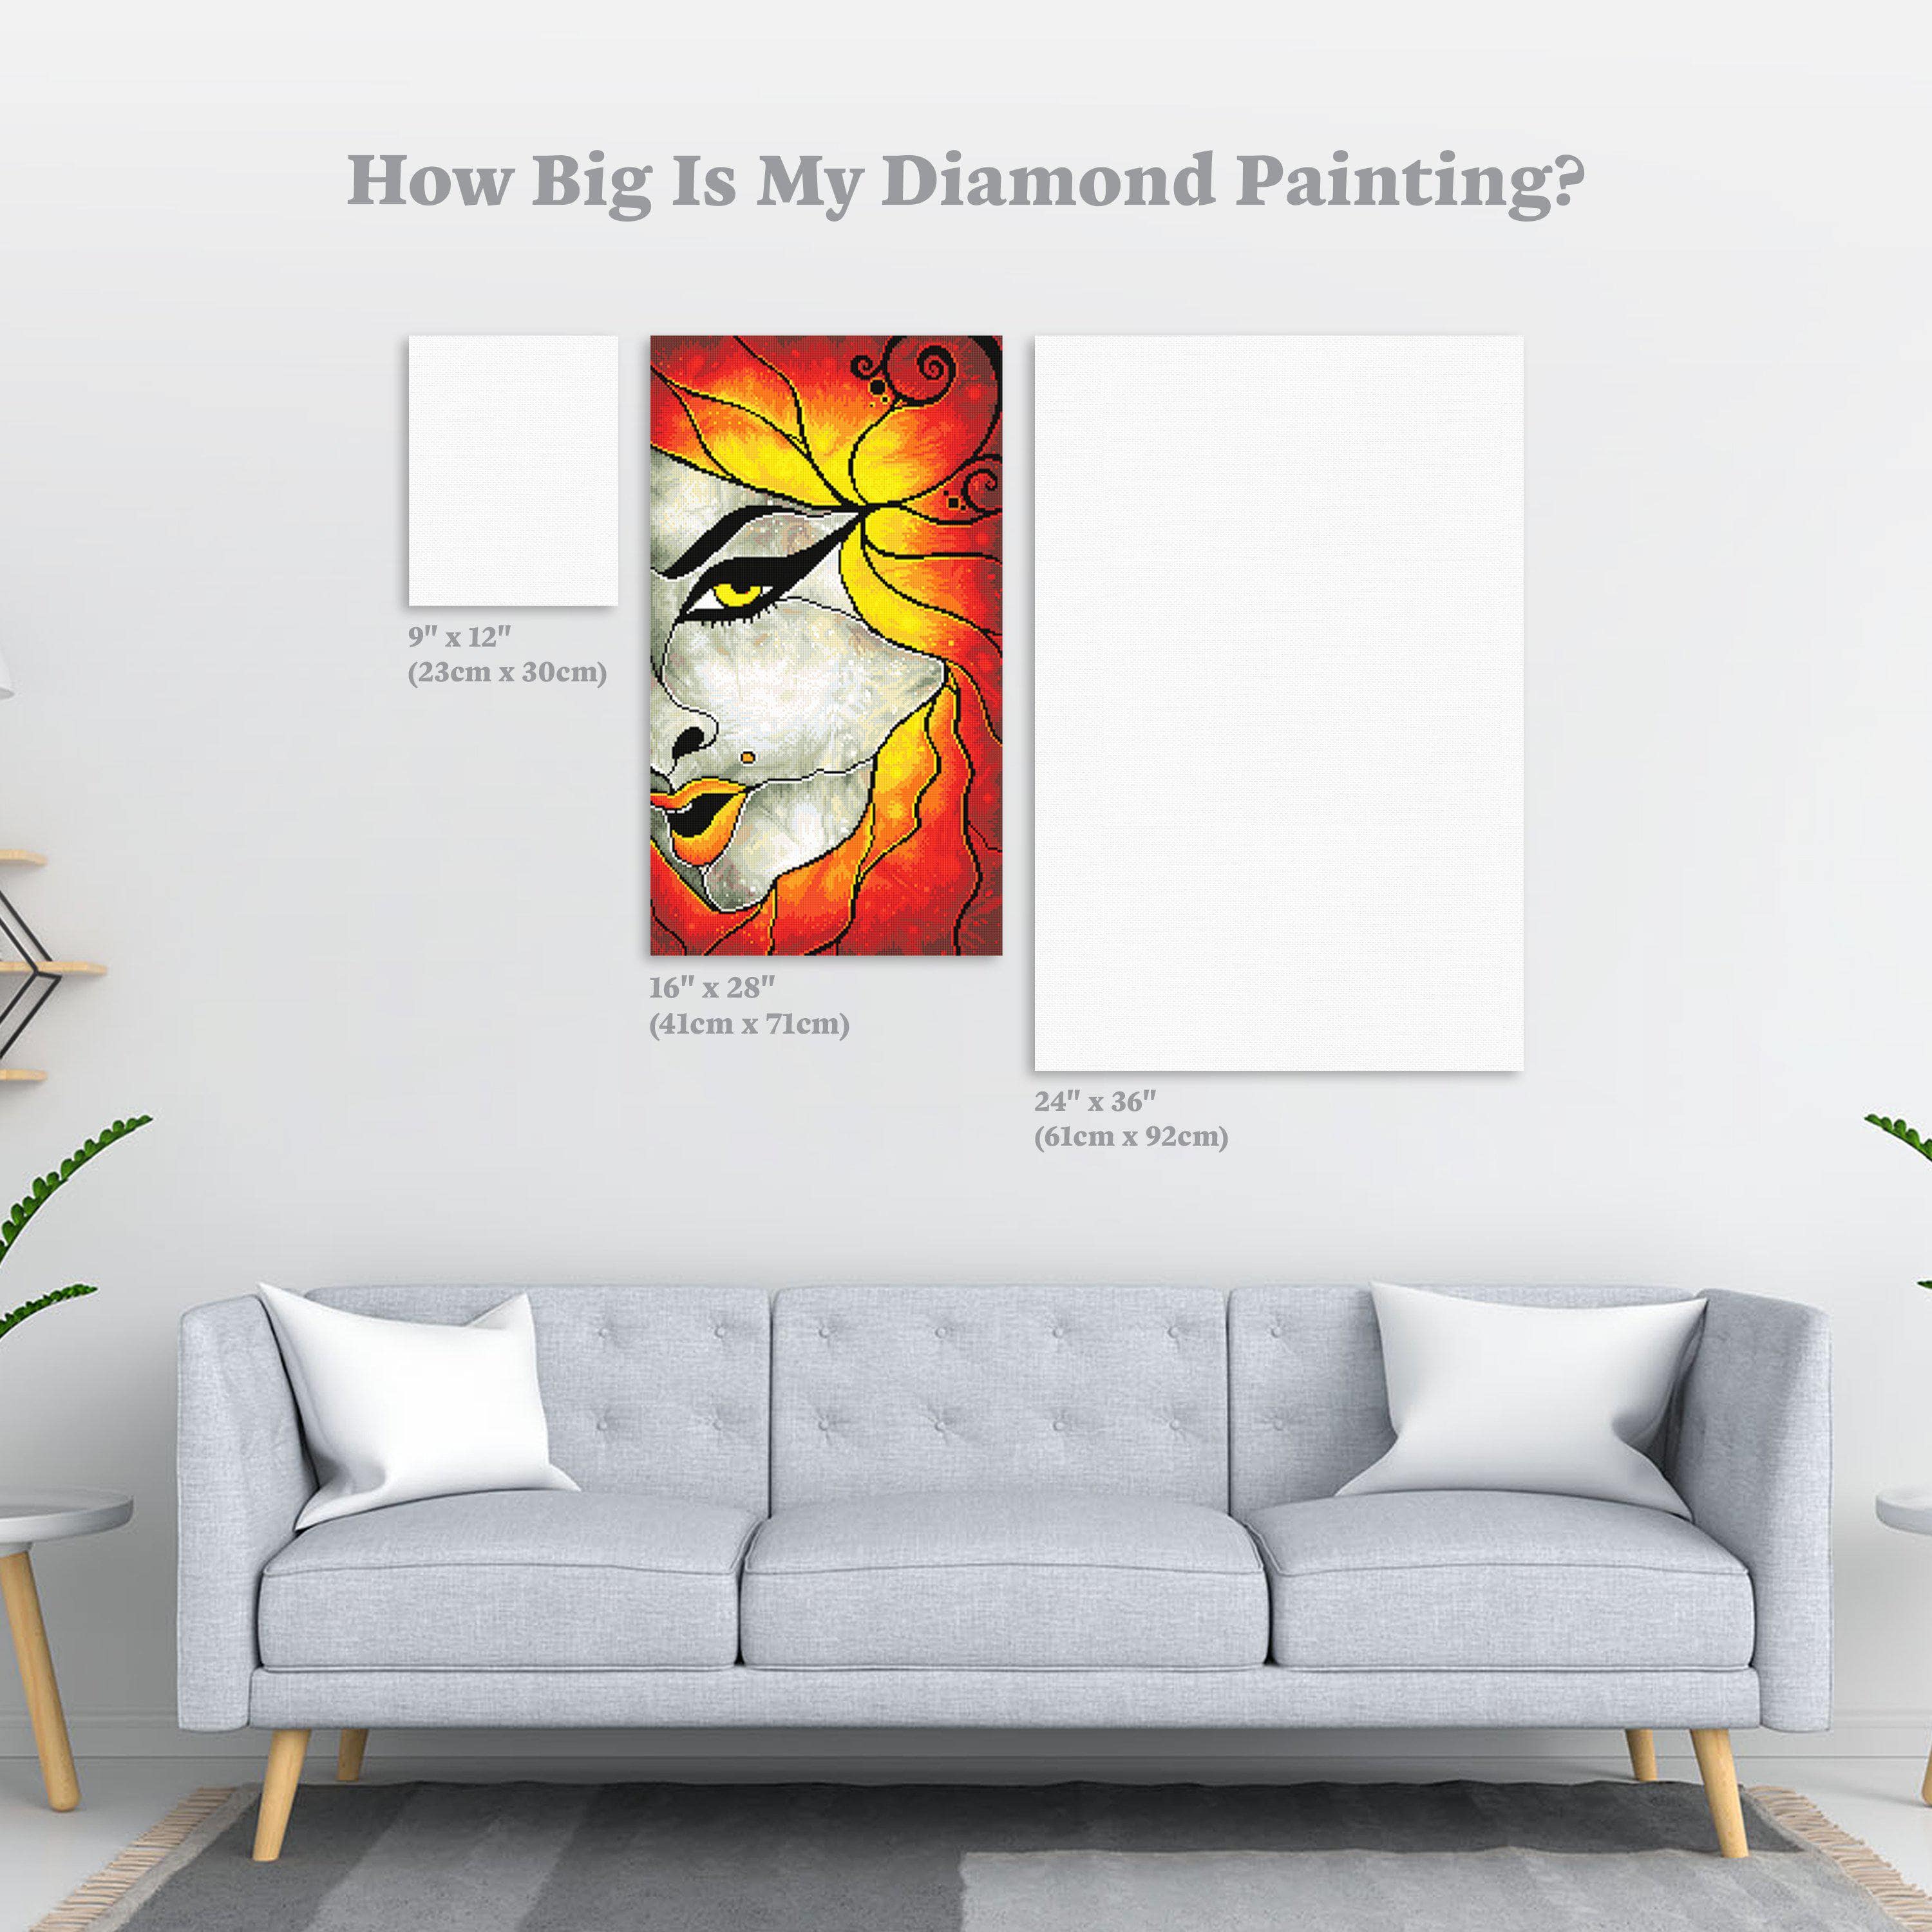 7 Common Diamond Painting Problems and How to Solve Them – Diamond Art Club